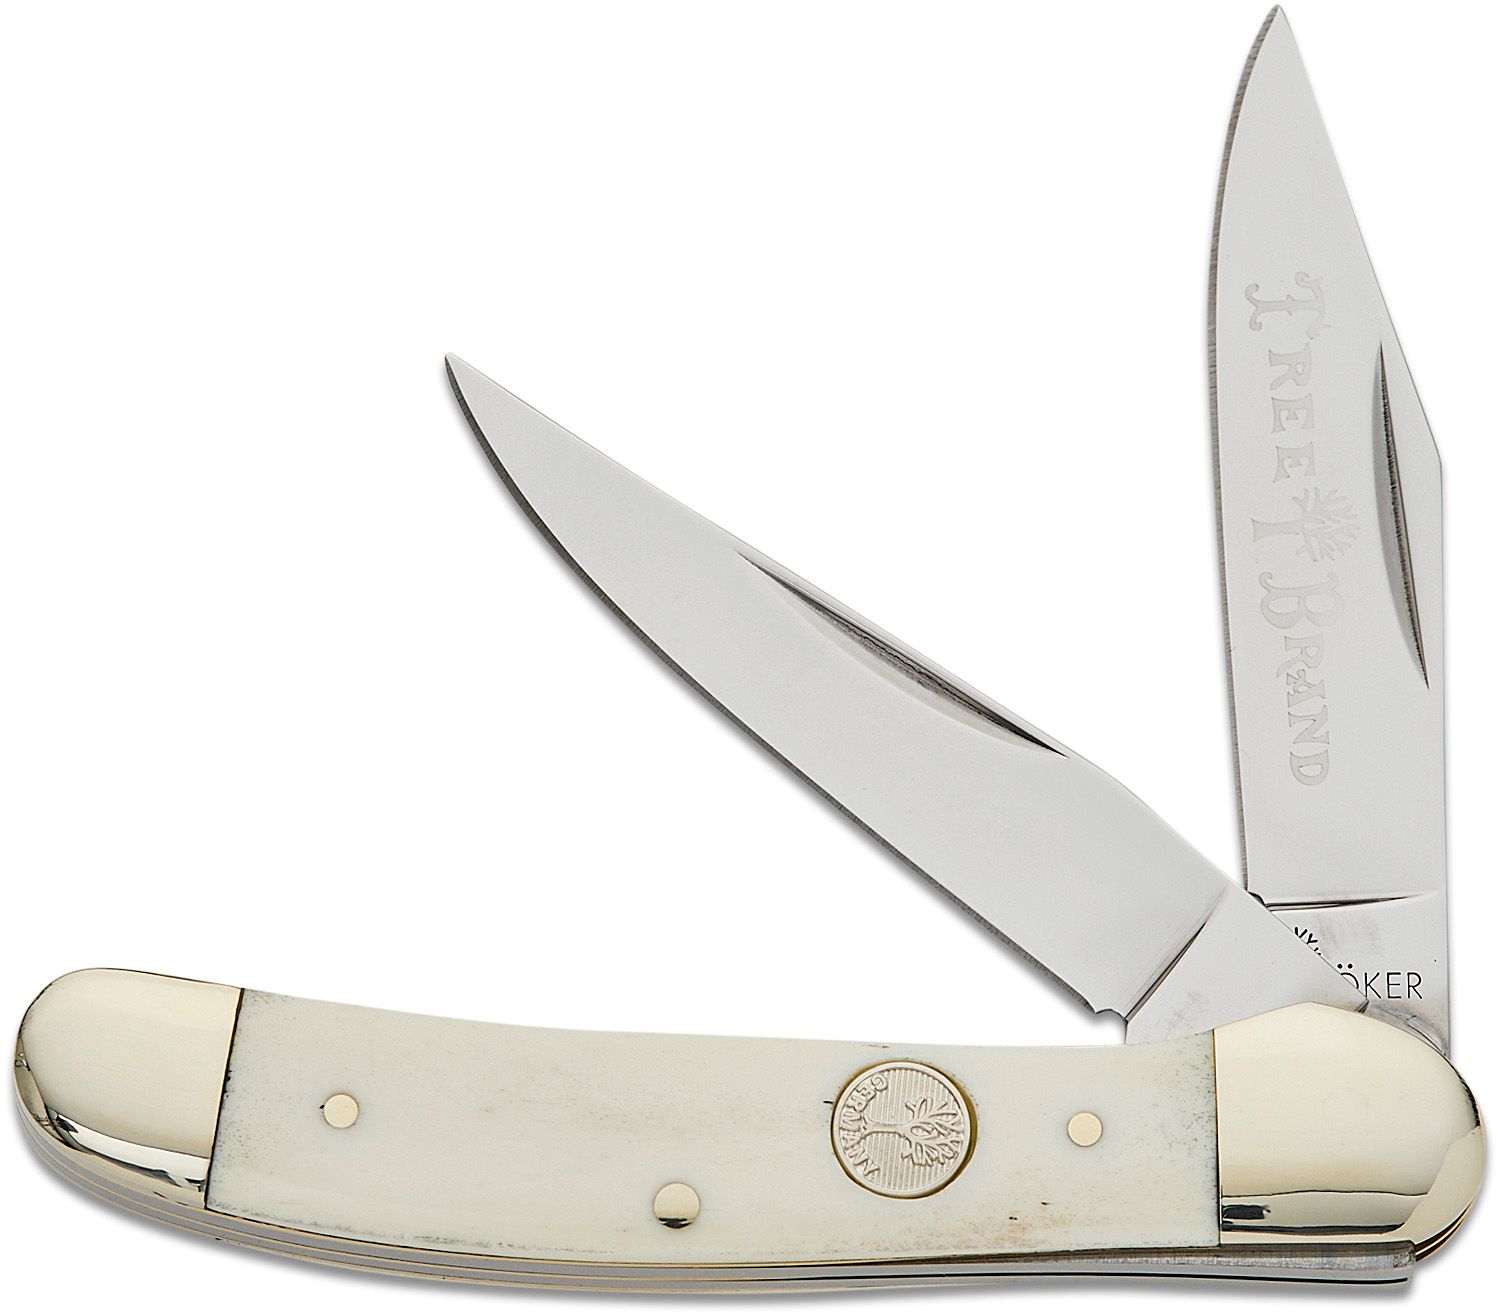  Boker Copperhead 3.75 Inch Pocket Knife, Jigged Brown Bone,  Traditional Series 2.0, Made in Germany : Everything Else